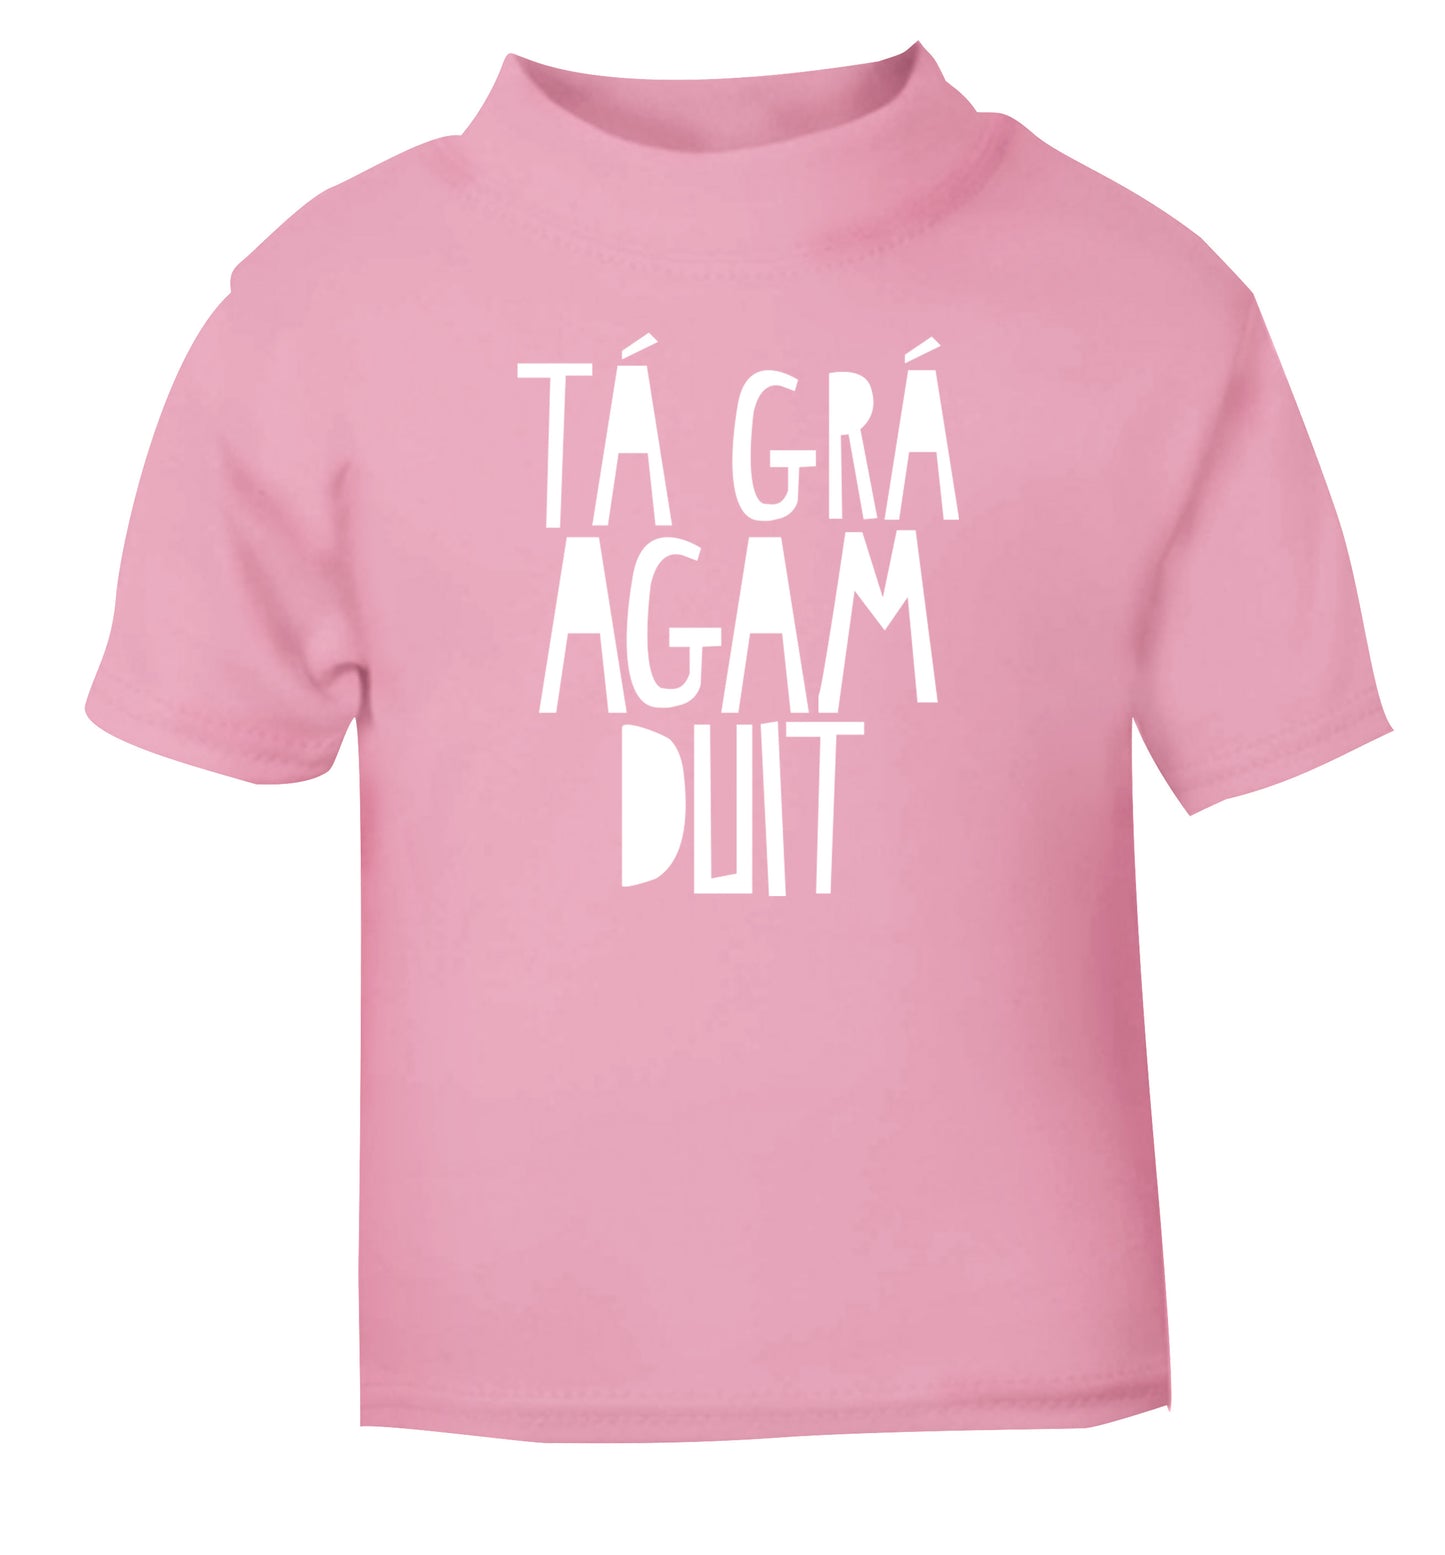 T‡ gr‡ agam duit - I love you light pink Baby Toddler Tshirt 2 Years